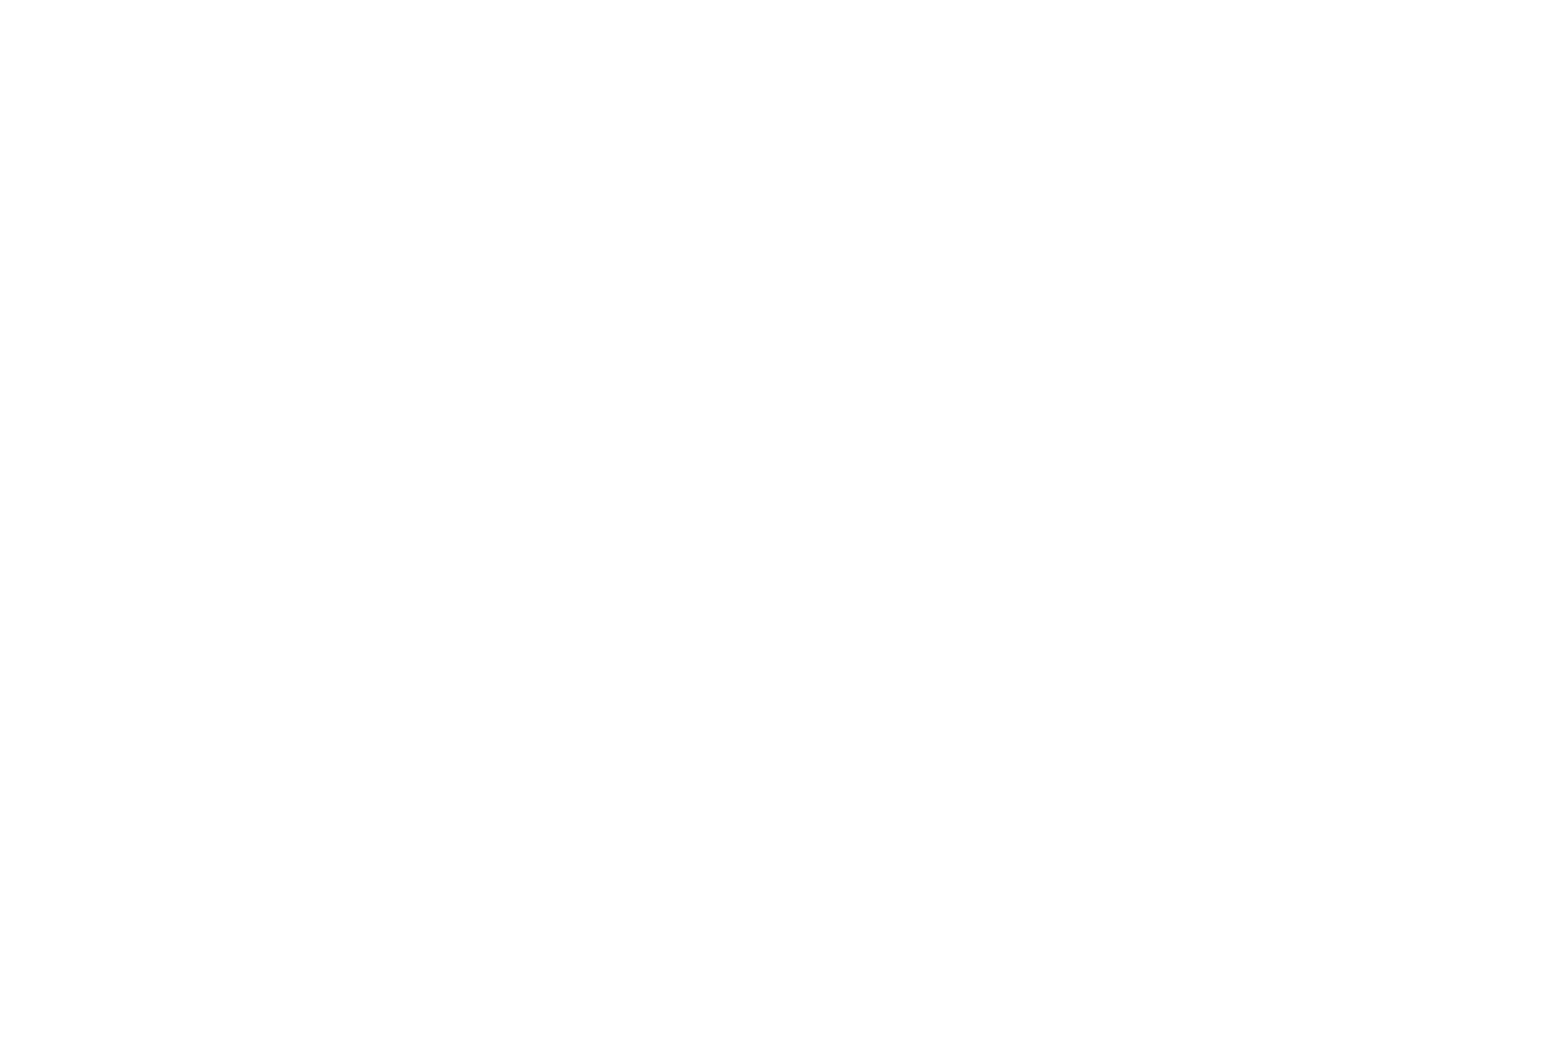 I m primarily a landscape photographer and for many years I ve traveled to different parts of the United States, usua   